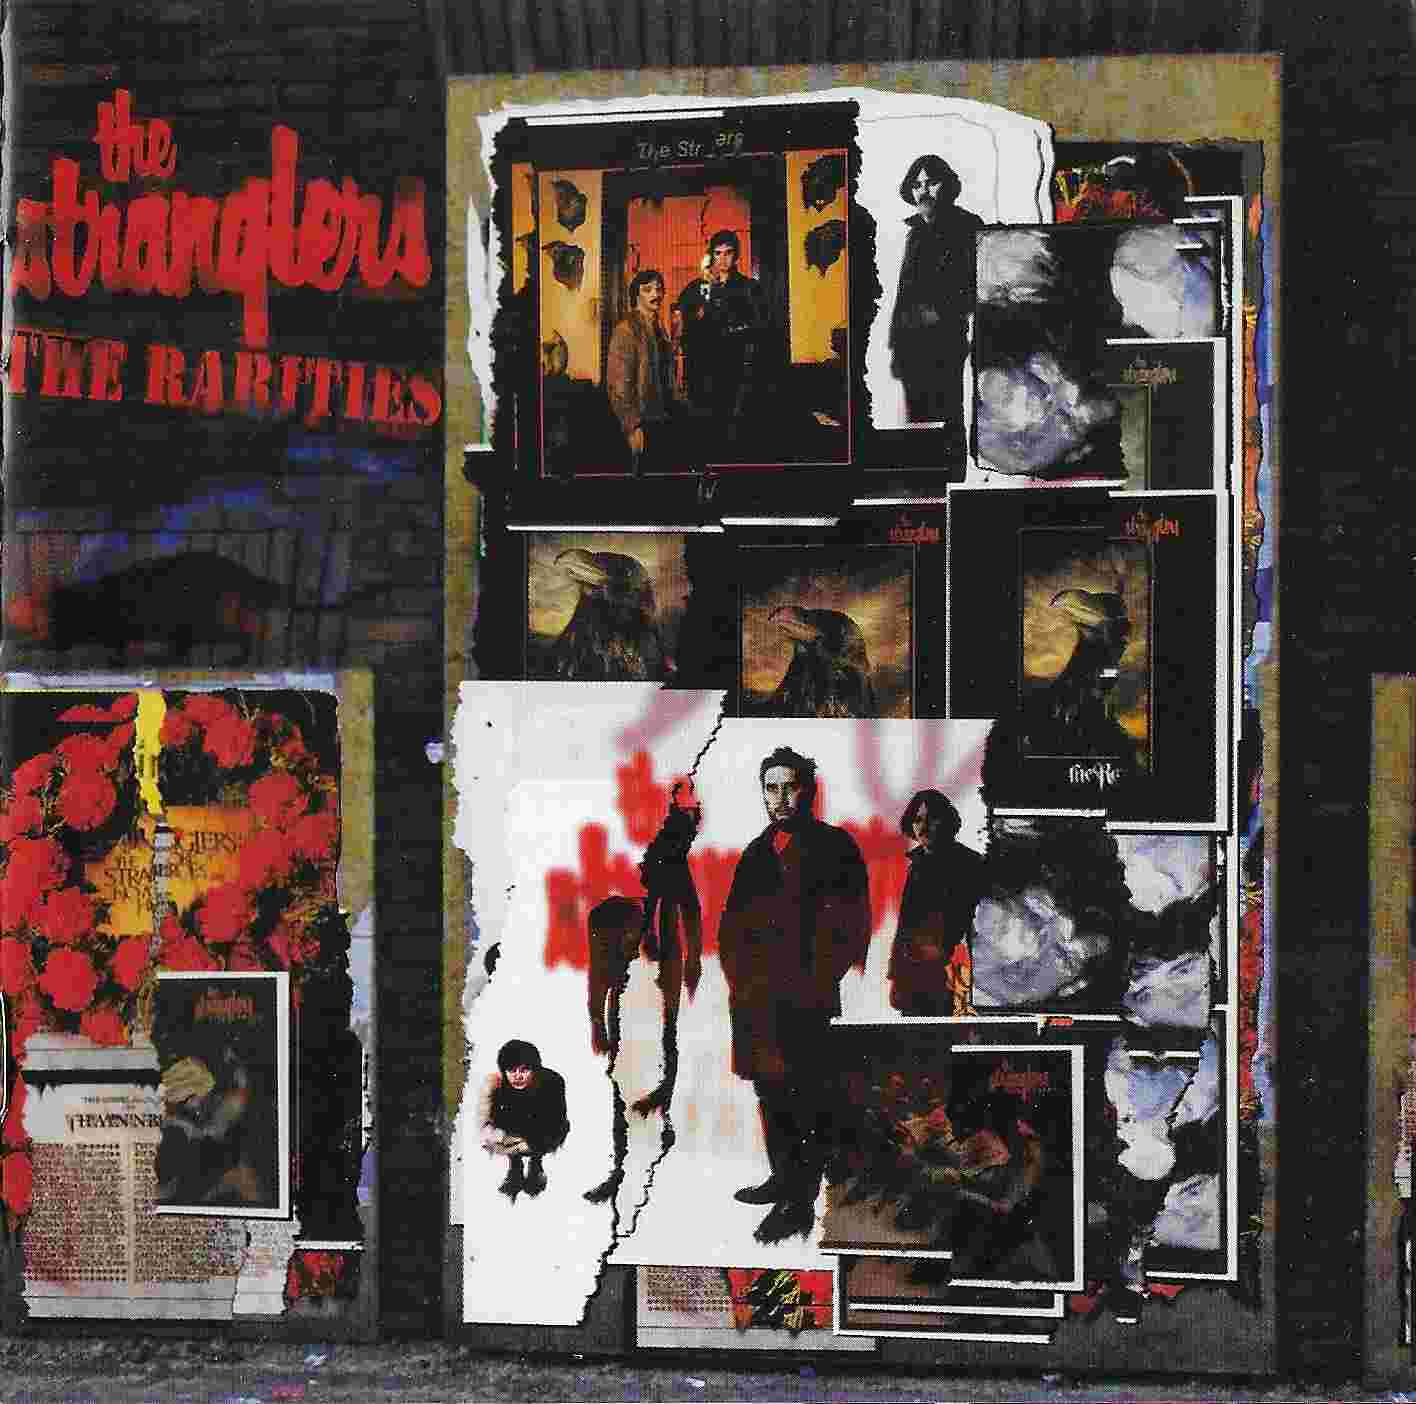 Picture of 541 0792 The rarities by artist The Stranglers from The Stranglers